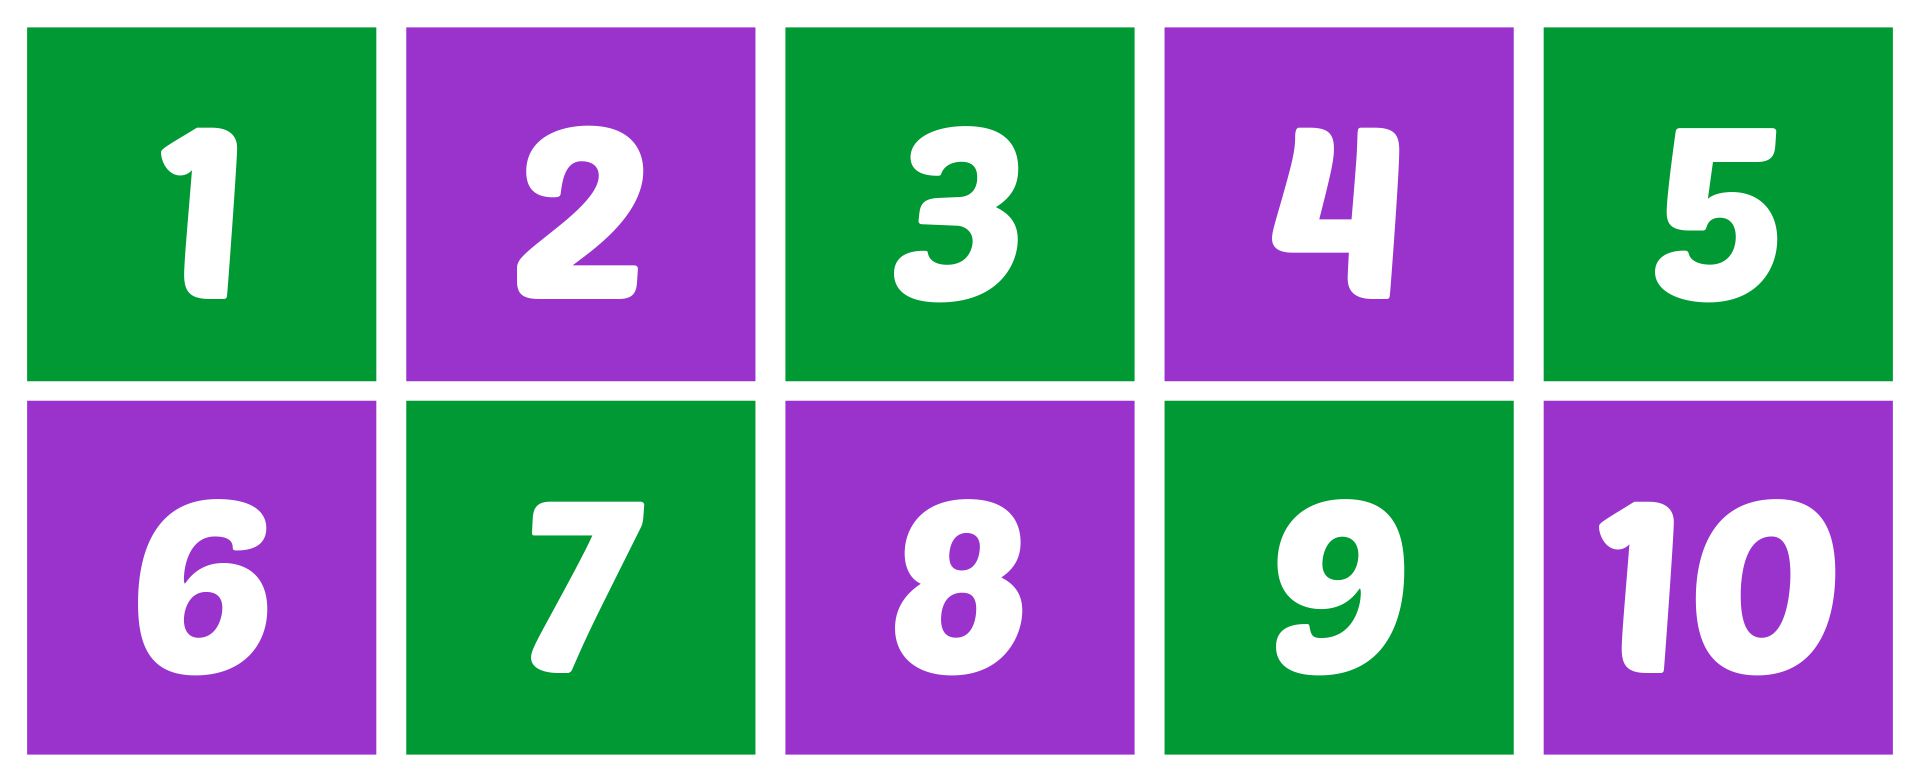 classroom-numbers-free-printables-templates-printable-download